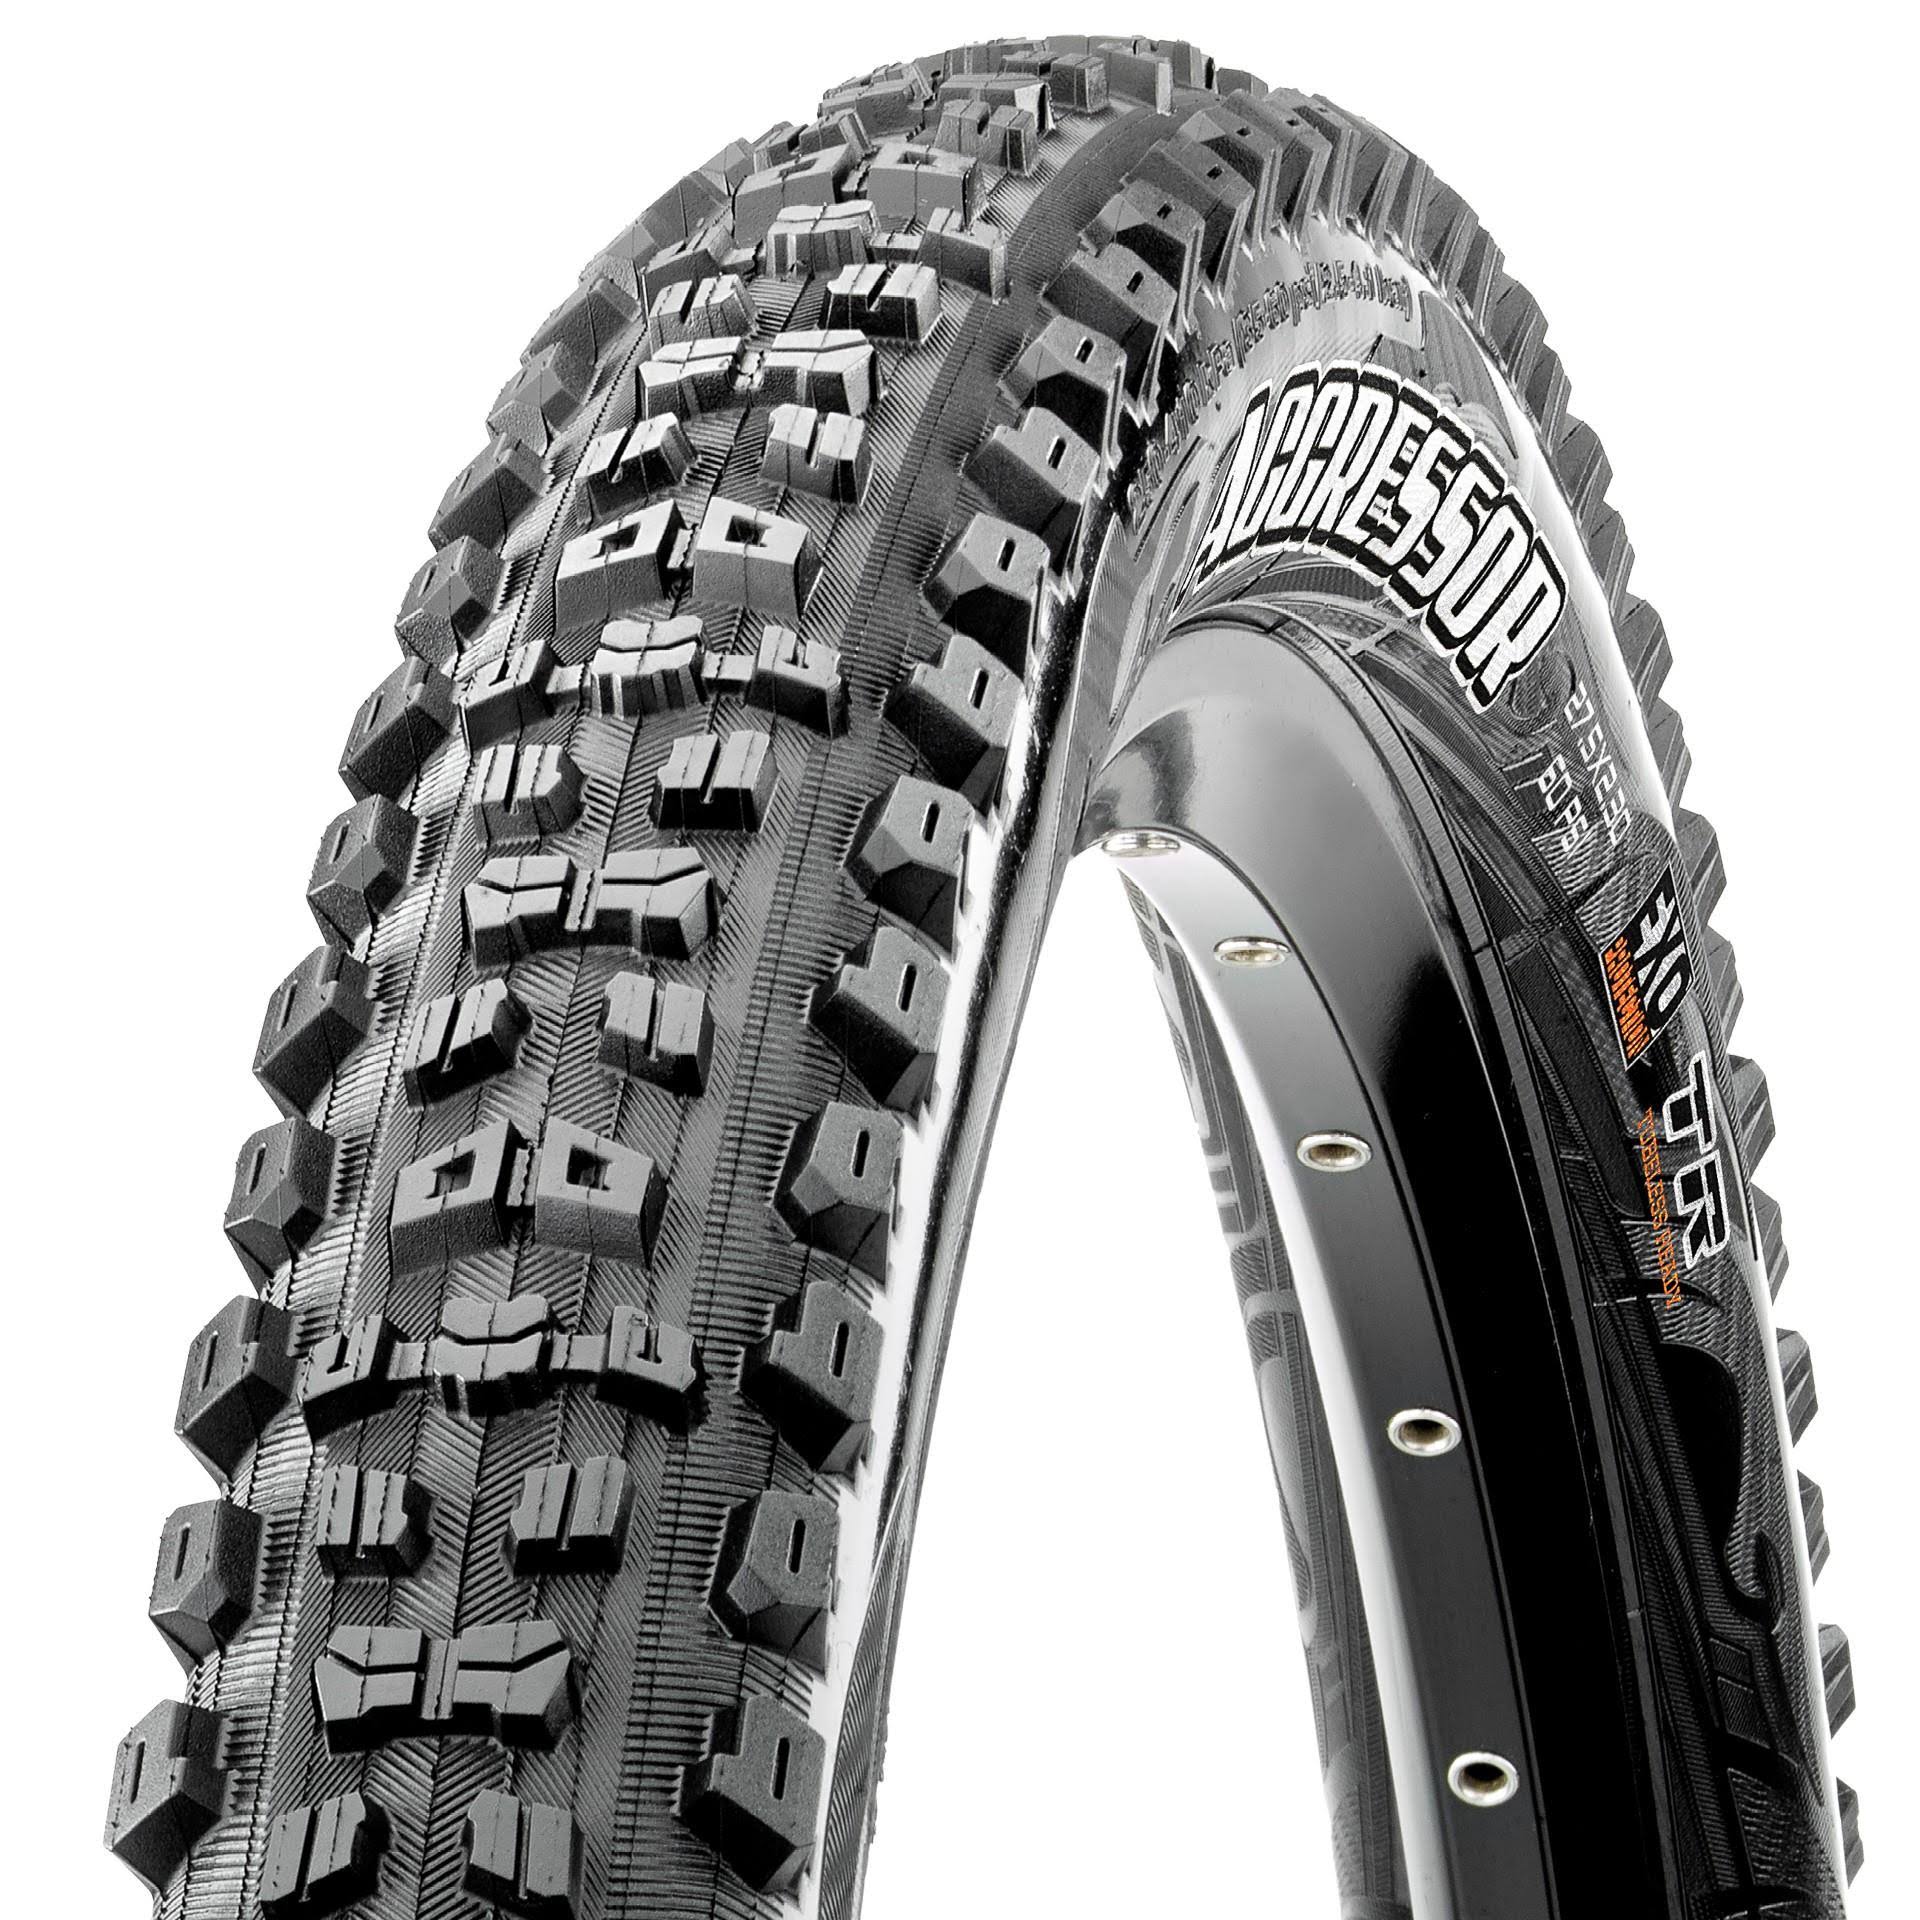 Maxxis Aggressor WT Dual Compound Double Down Tubeless Ready Clincher Folding Bead Tire - Black, 27.5" x 2.5"